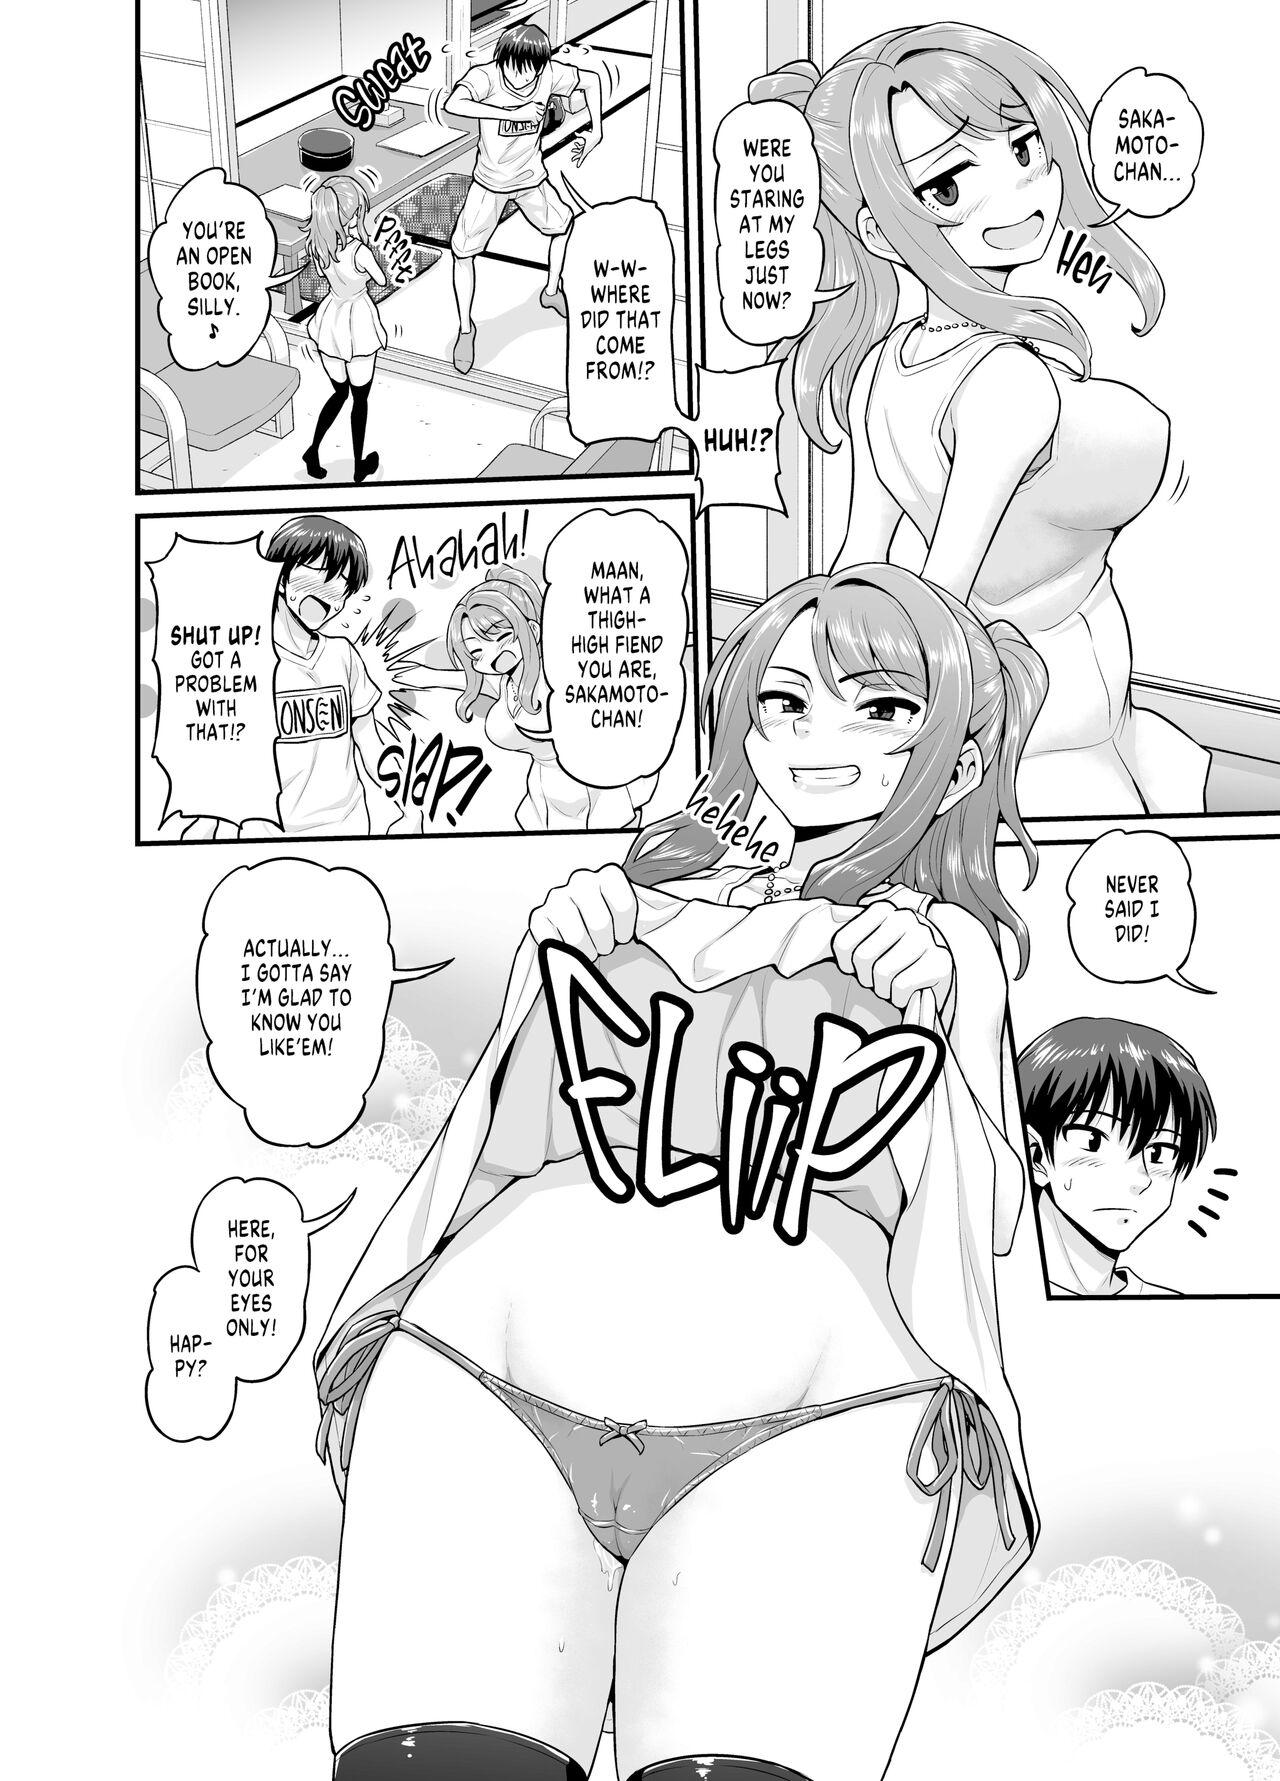 Chudai Getting it On With Your Gaming Buddy at the Hot Spring NTRVer. - Original Female Orgasm - Page 3